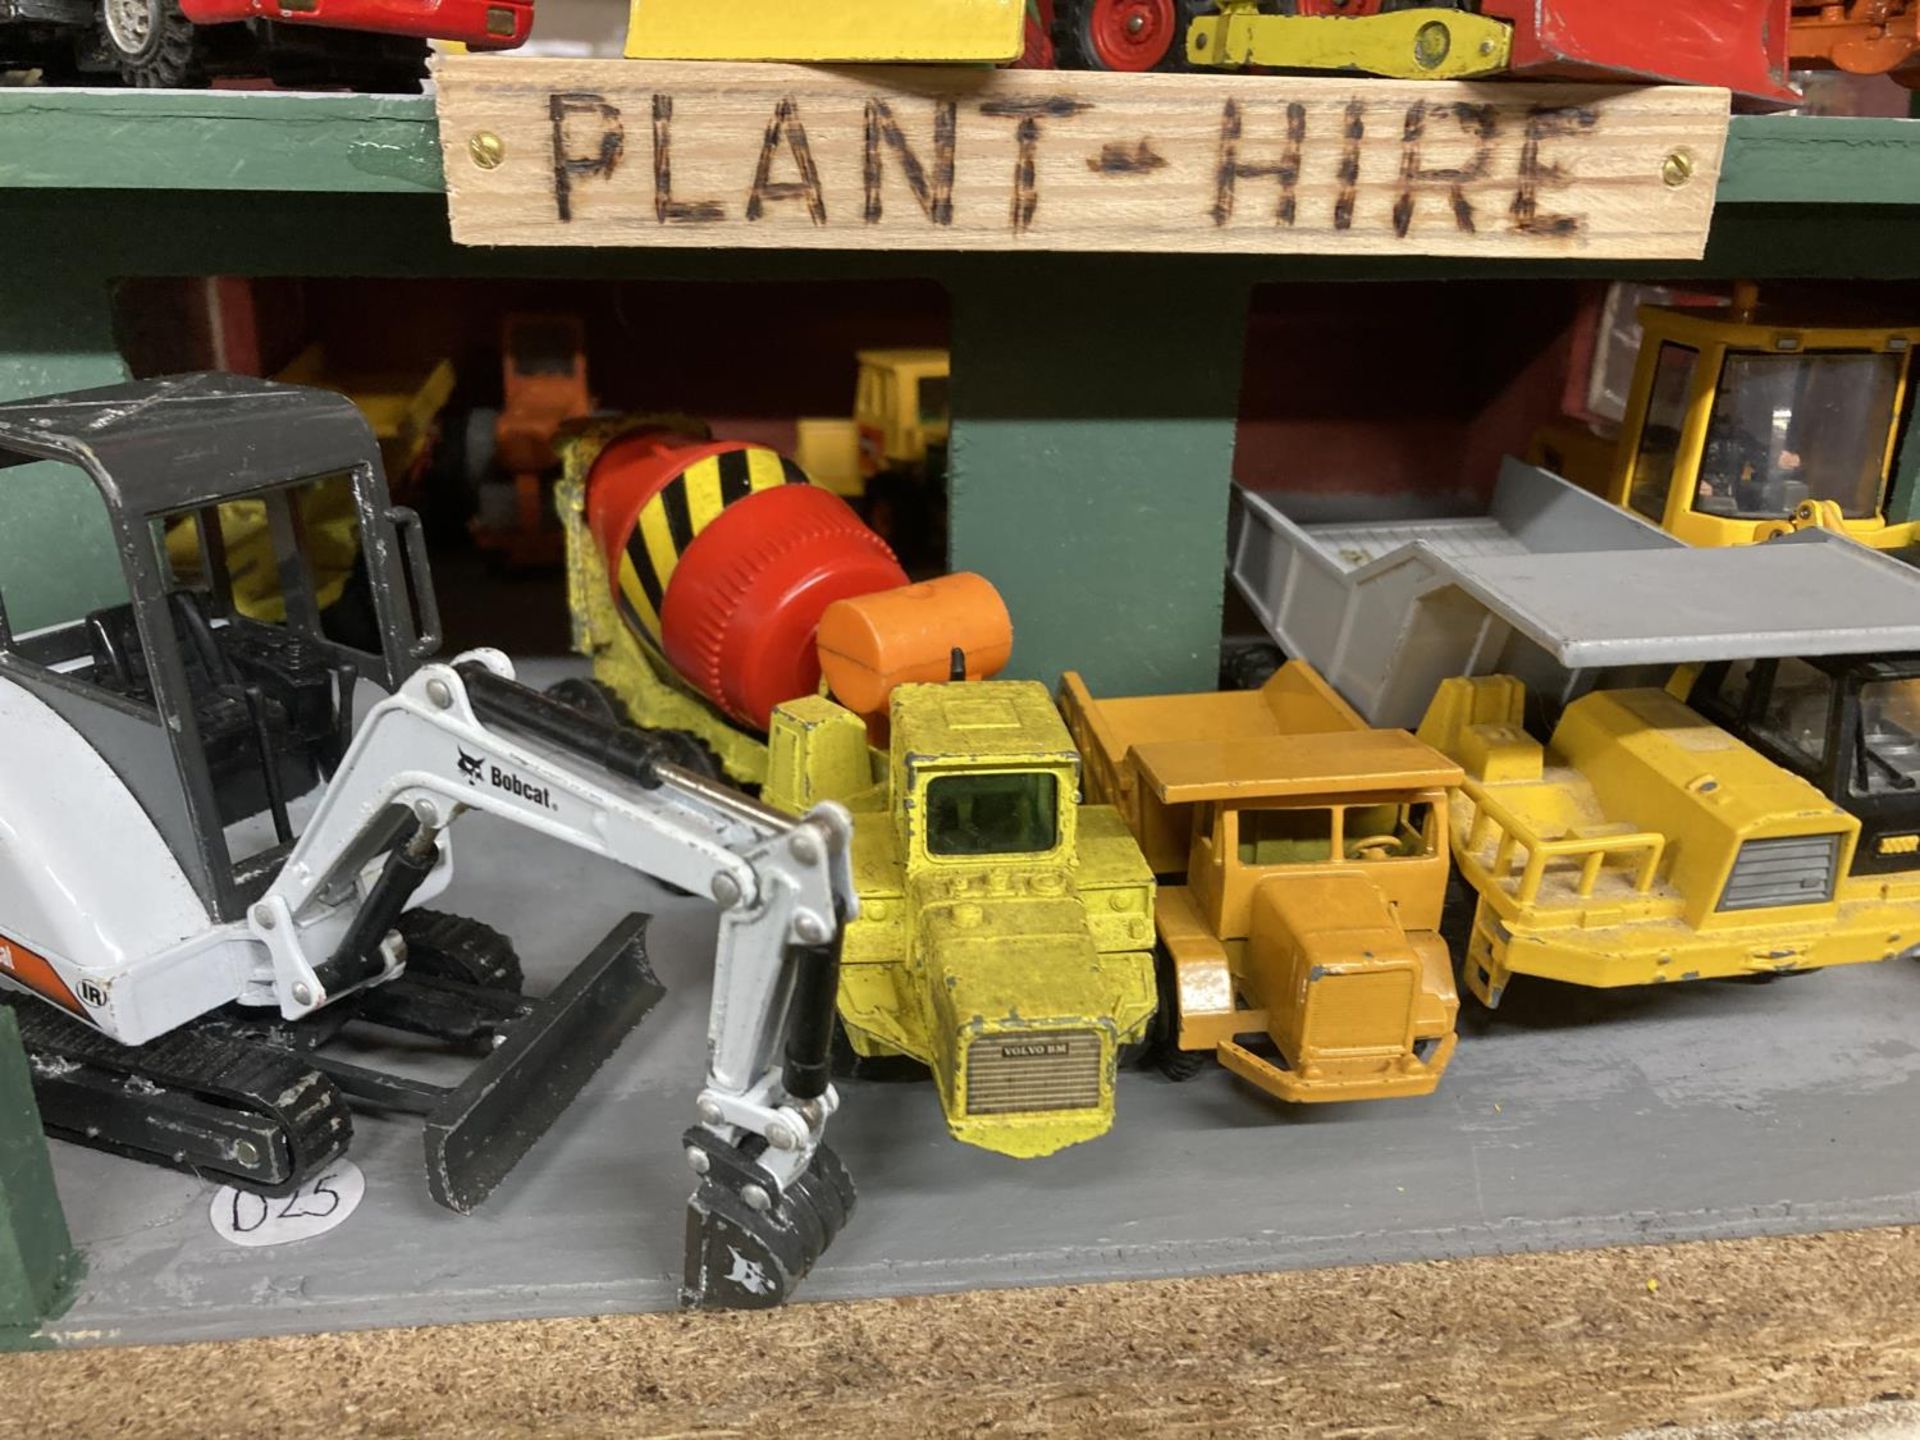 A PLANT HIRE GARAGE WITH TWELVE VARIOUS VEHICLES AND MACHINES - Image 4 of 4